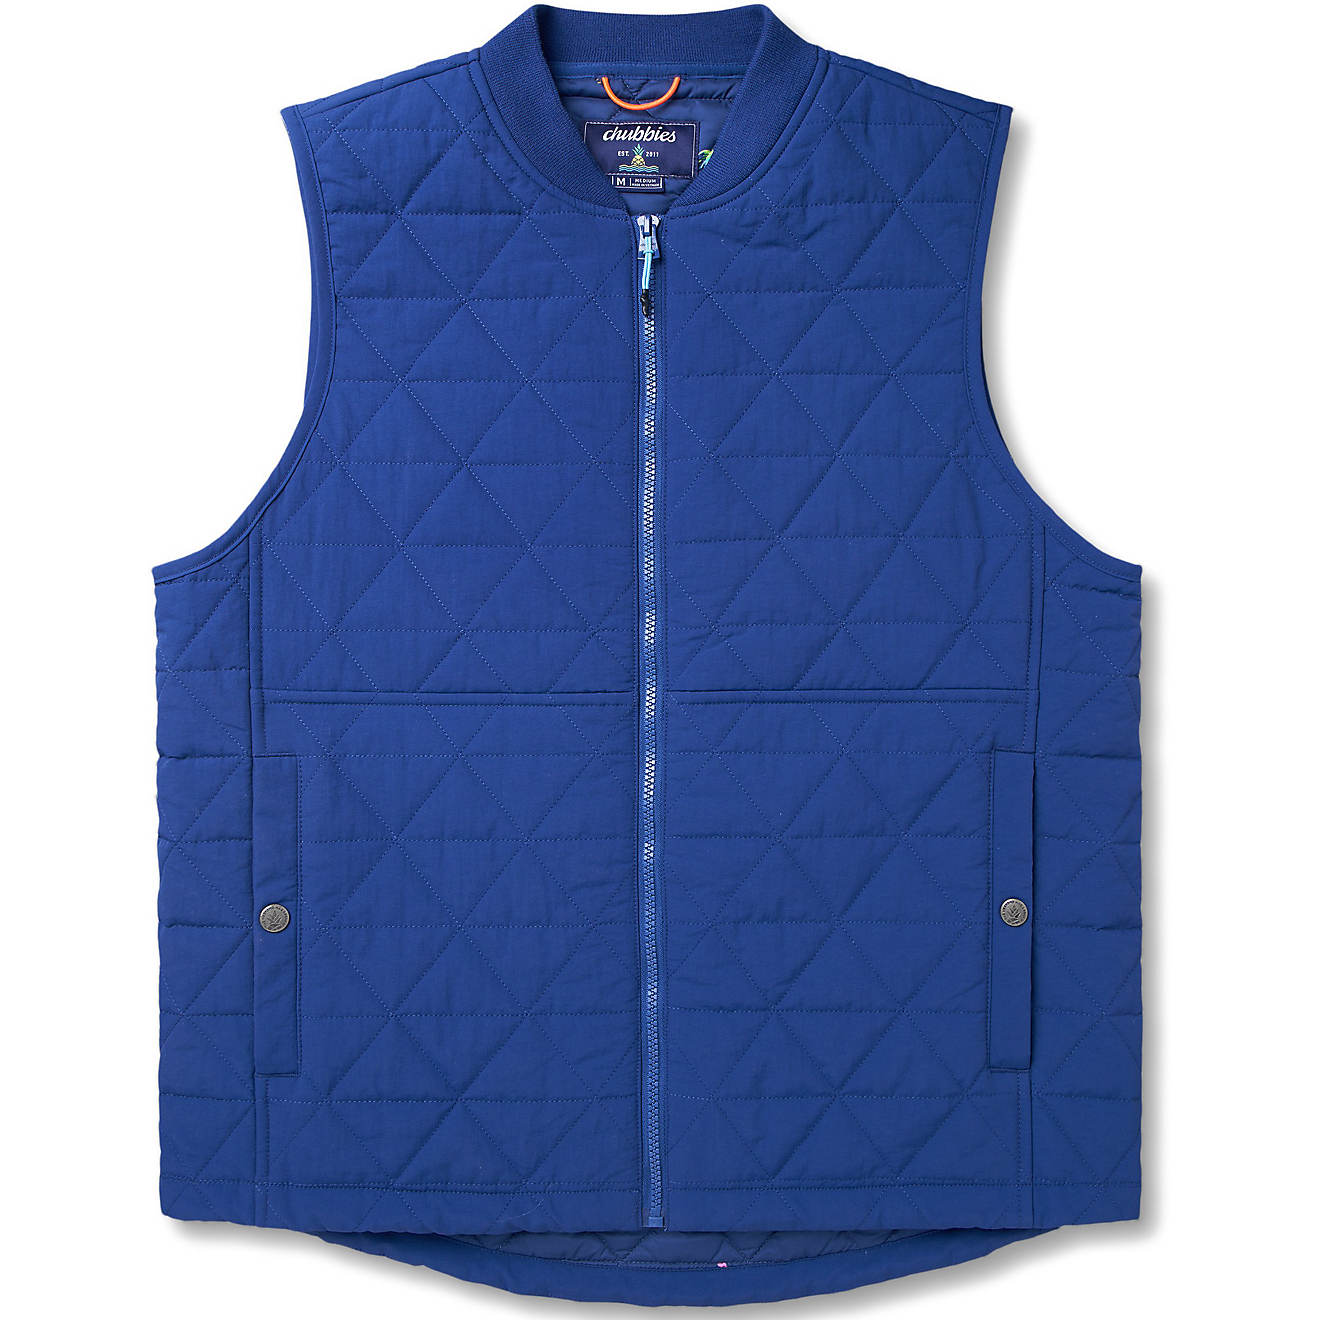 Chubbies Men's Quilted Vest | Free Shipping at Academy